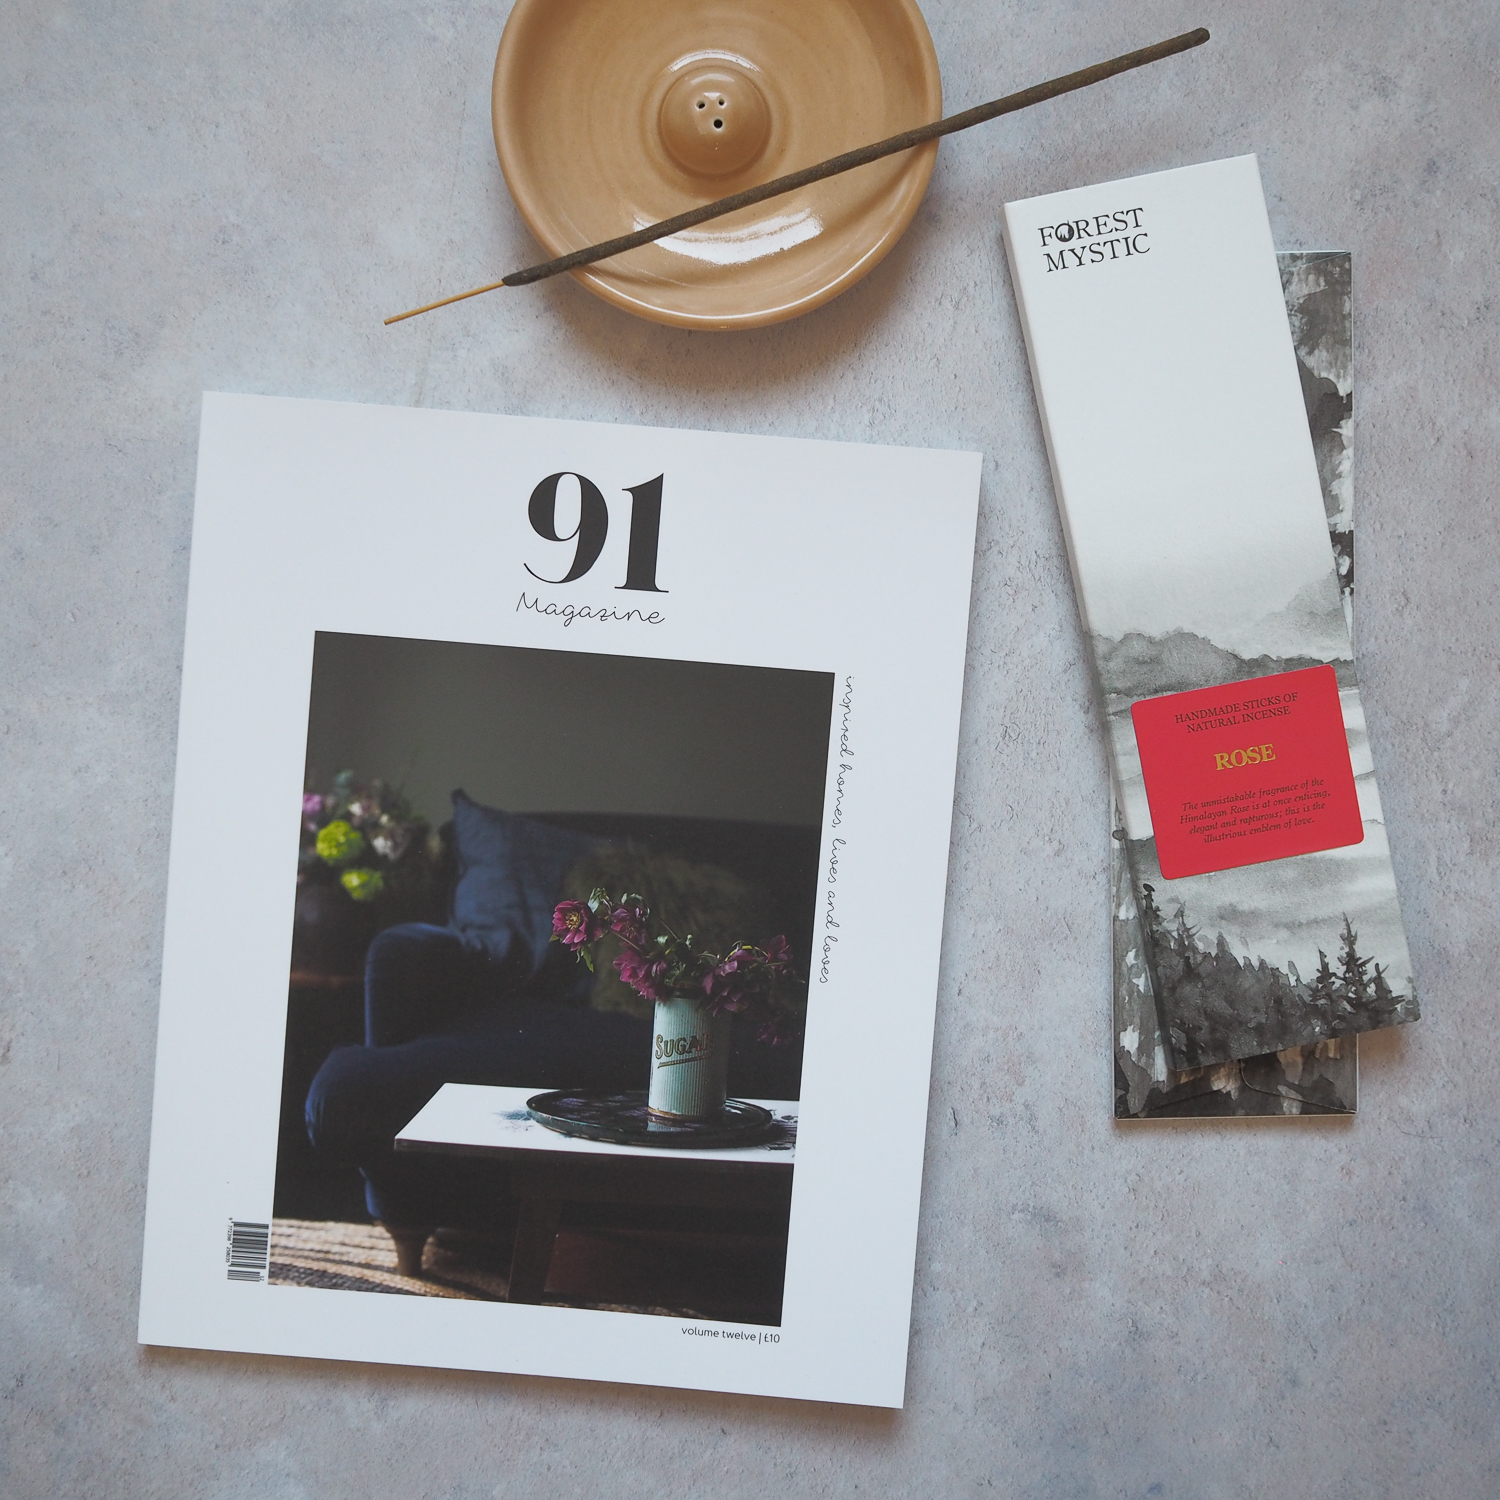 91 Magazine and Forest Mystic incense gift set